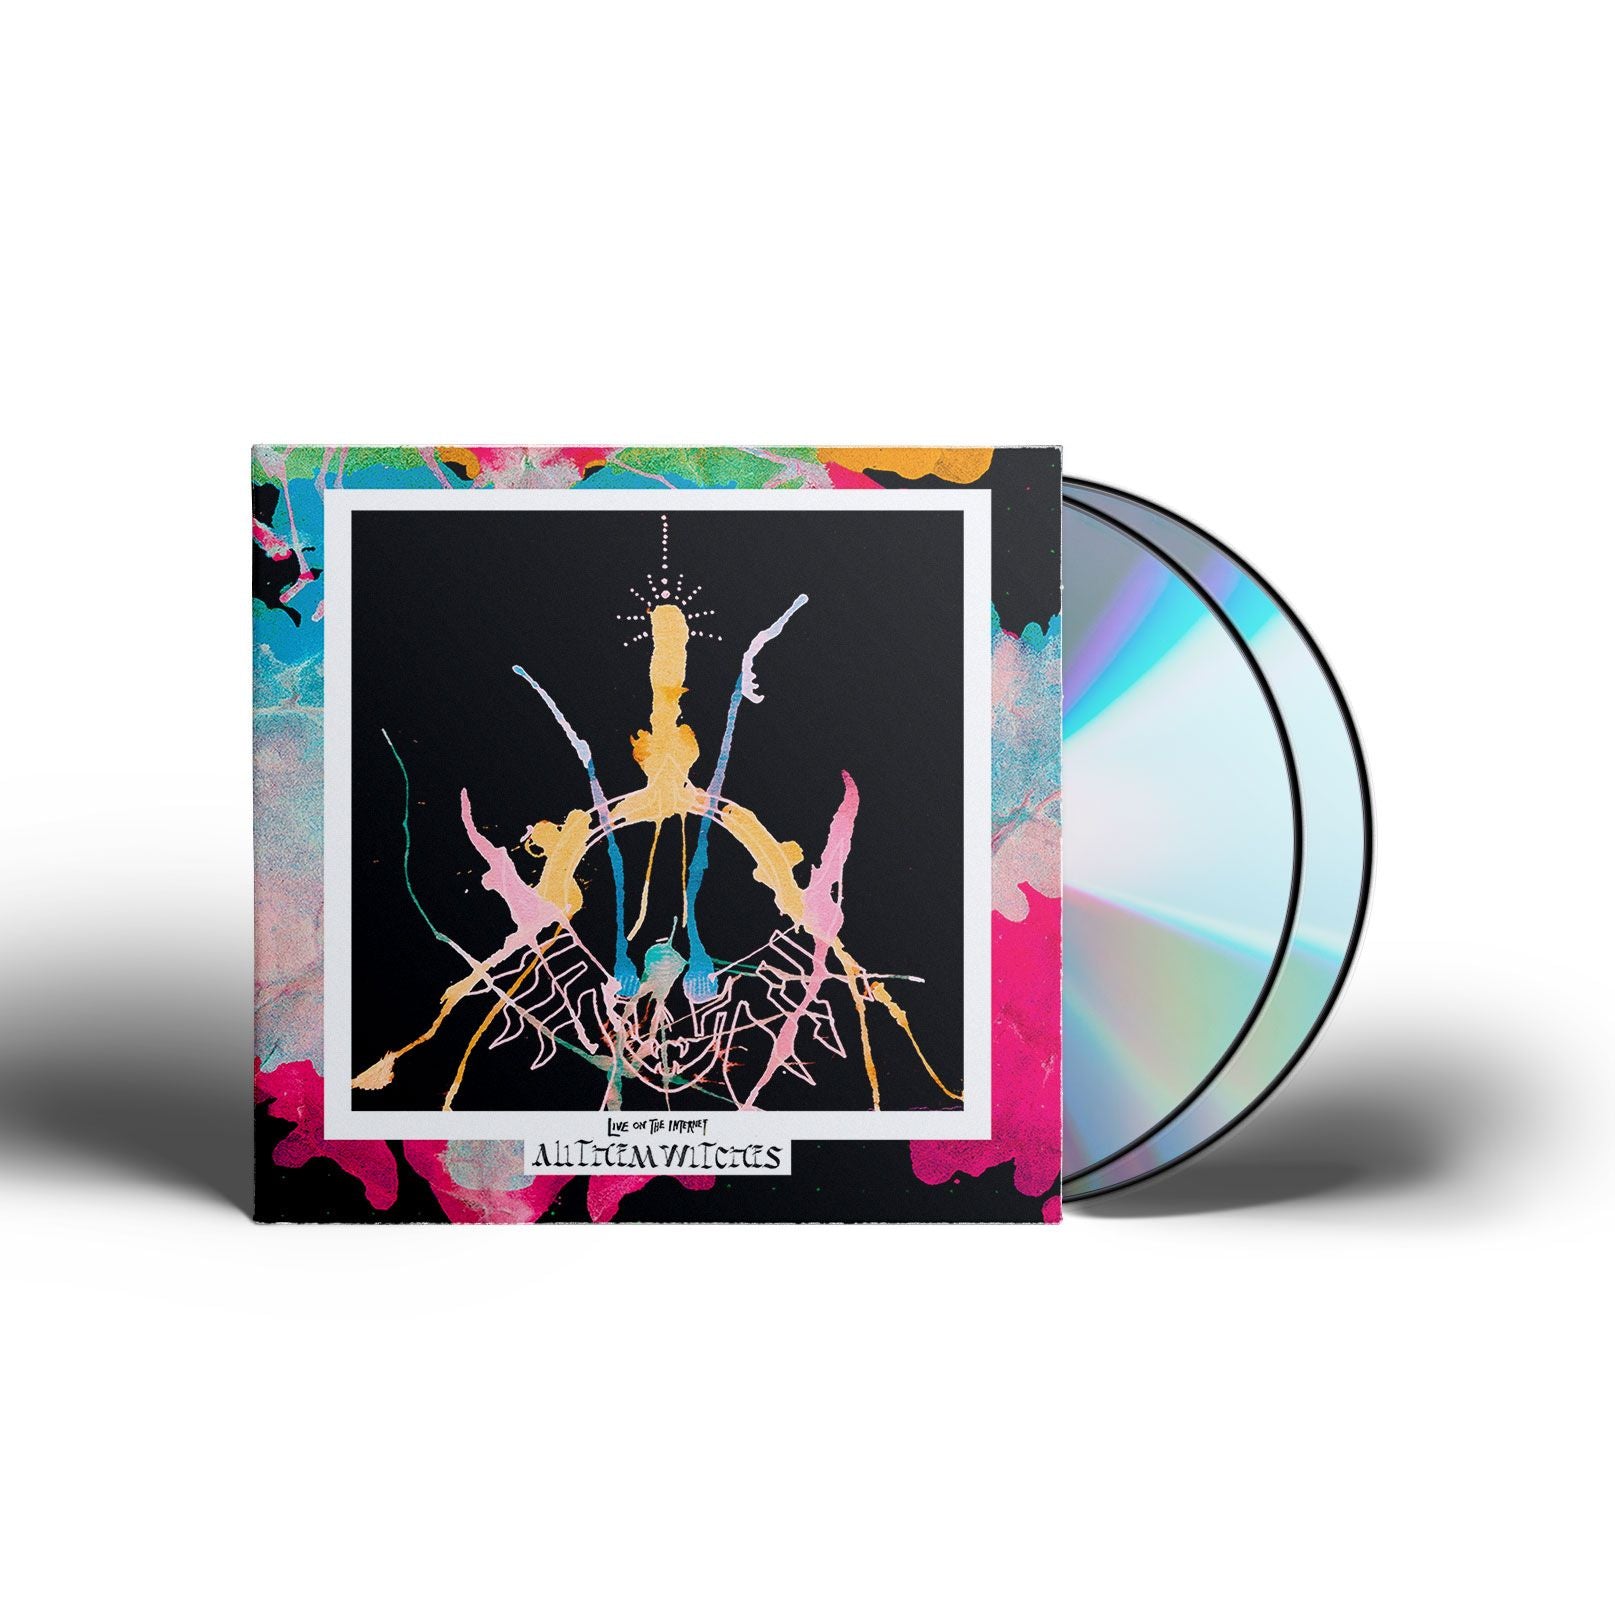 All Them Witches - LIVE ON THE INTERNET [CD]